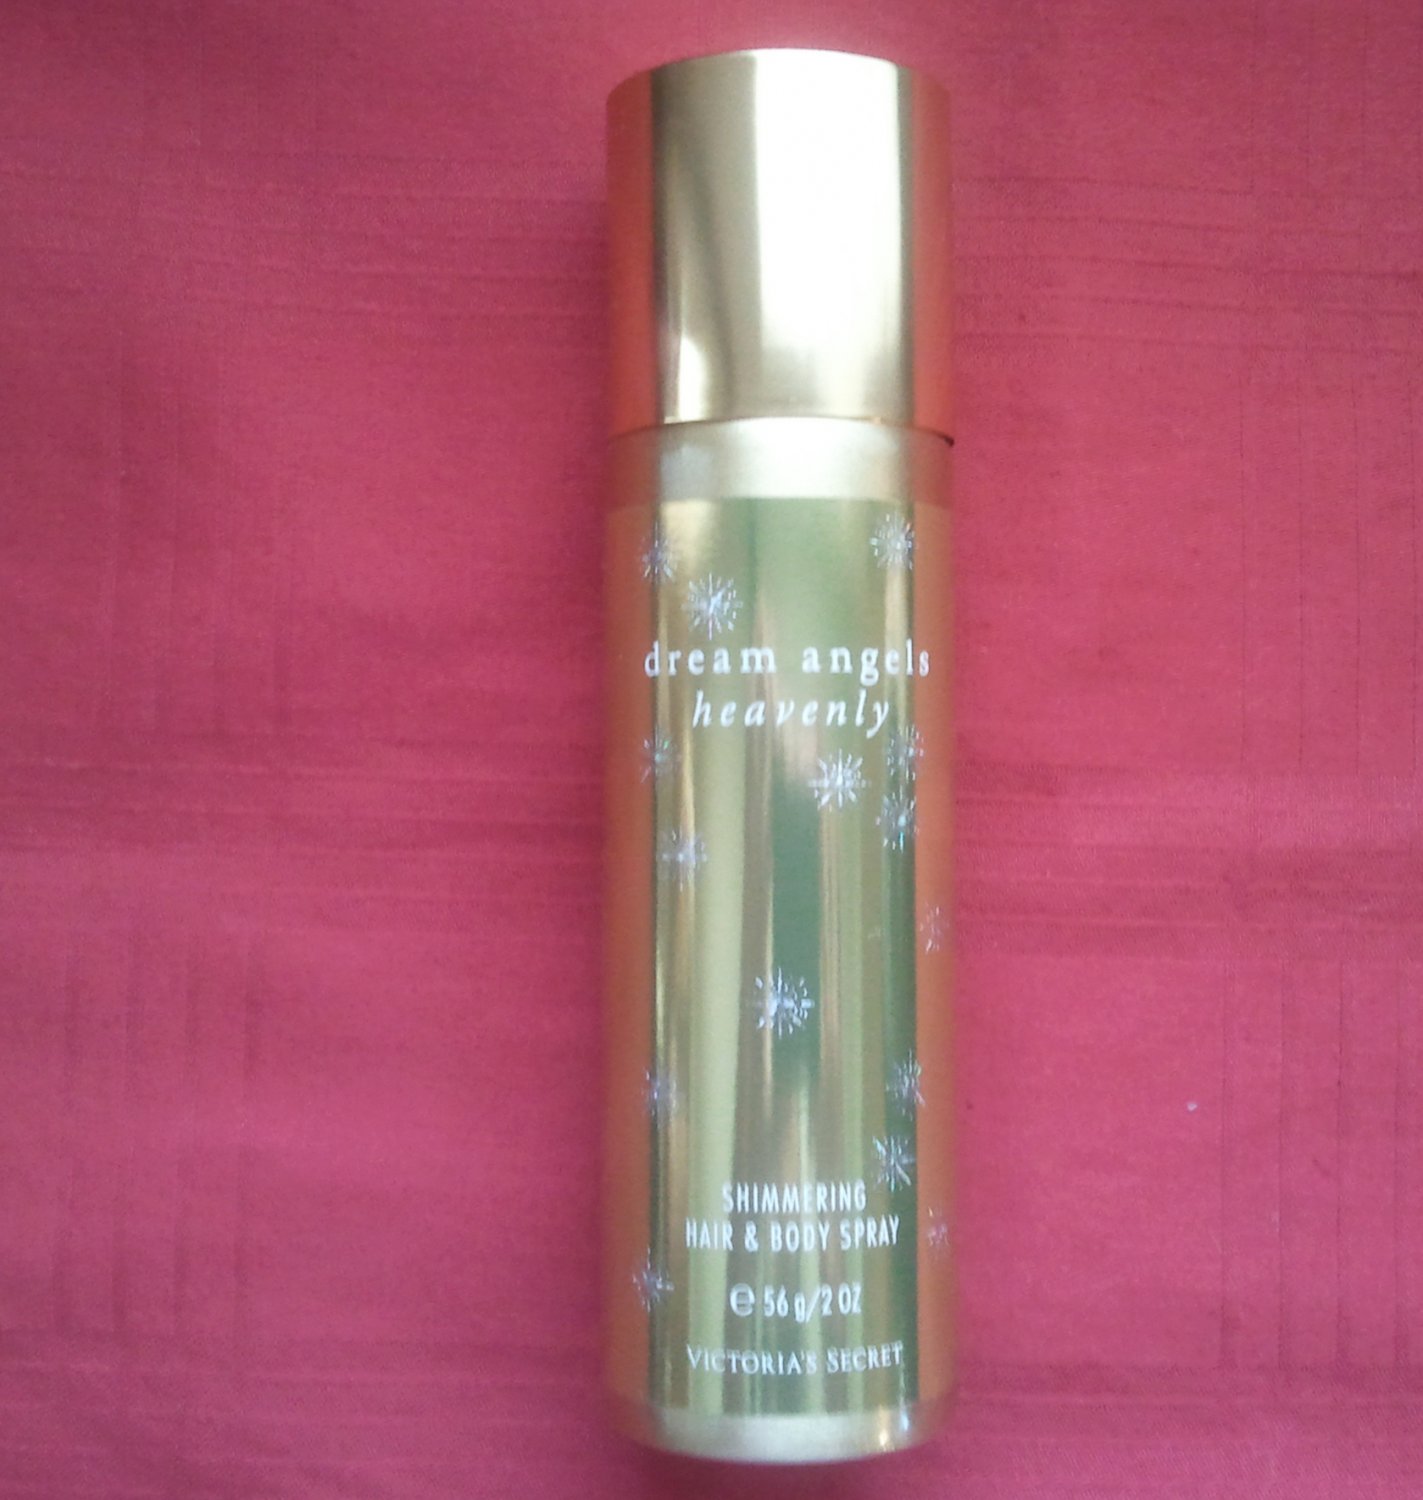 Victoria's Secret Dream Angels Heavenly Shimmering Hair and Body Spray